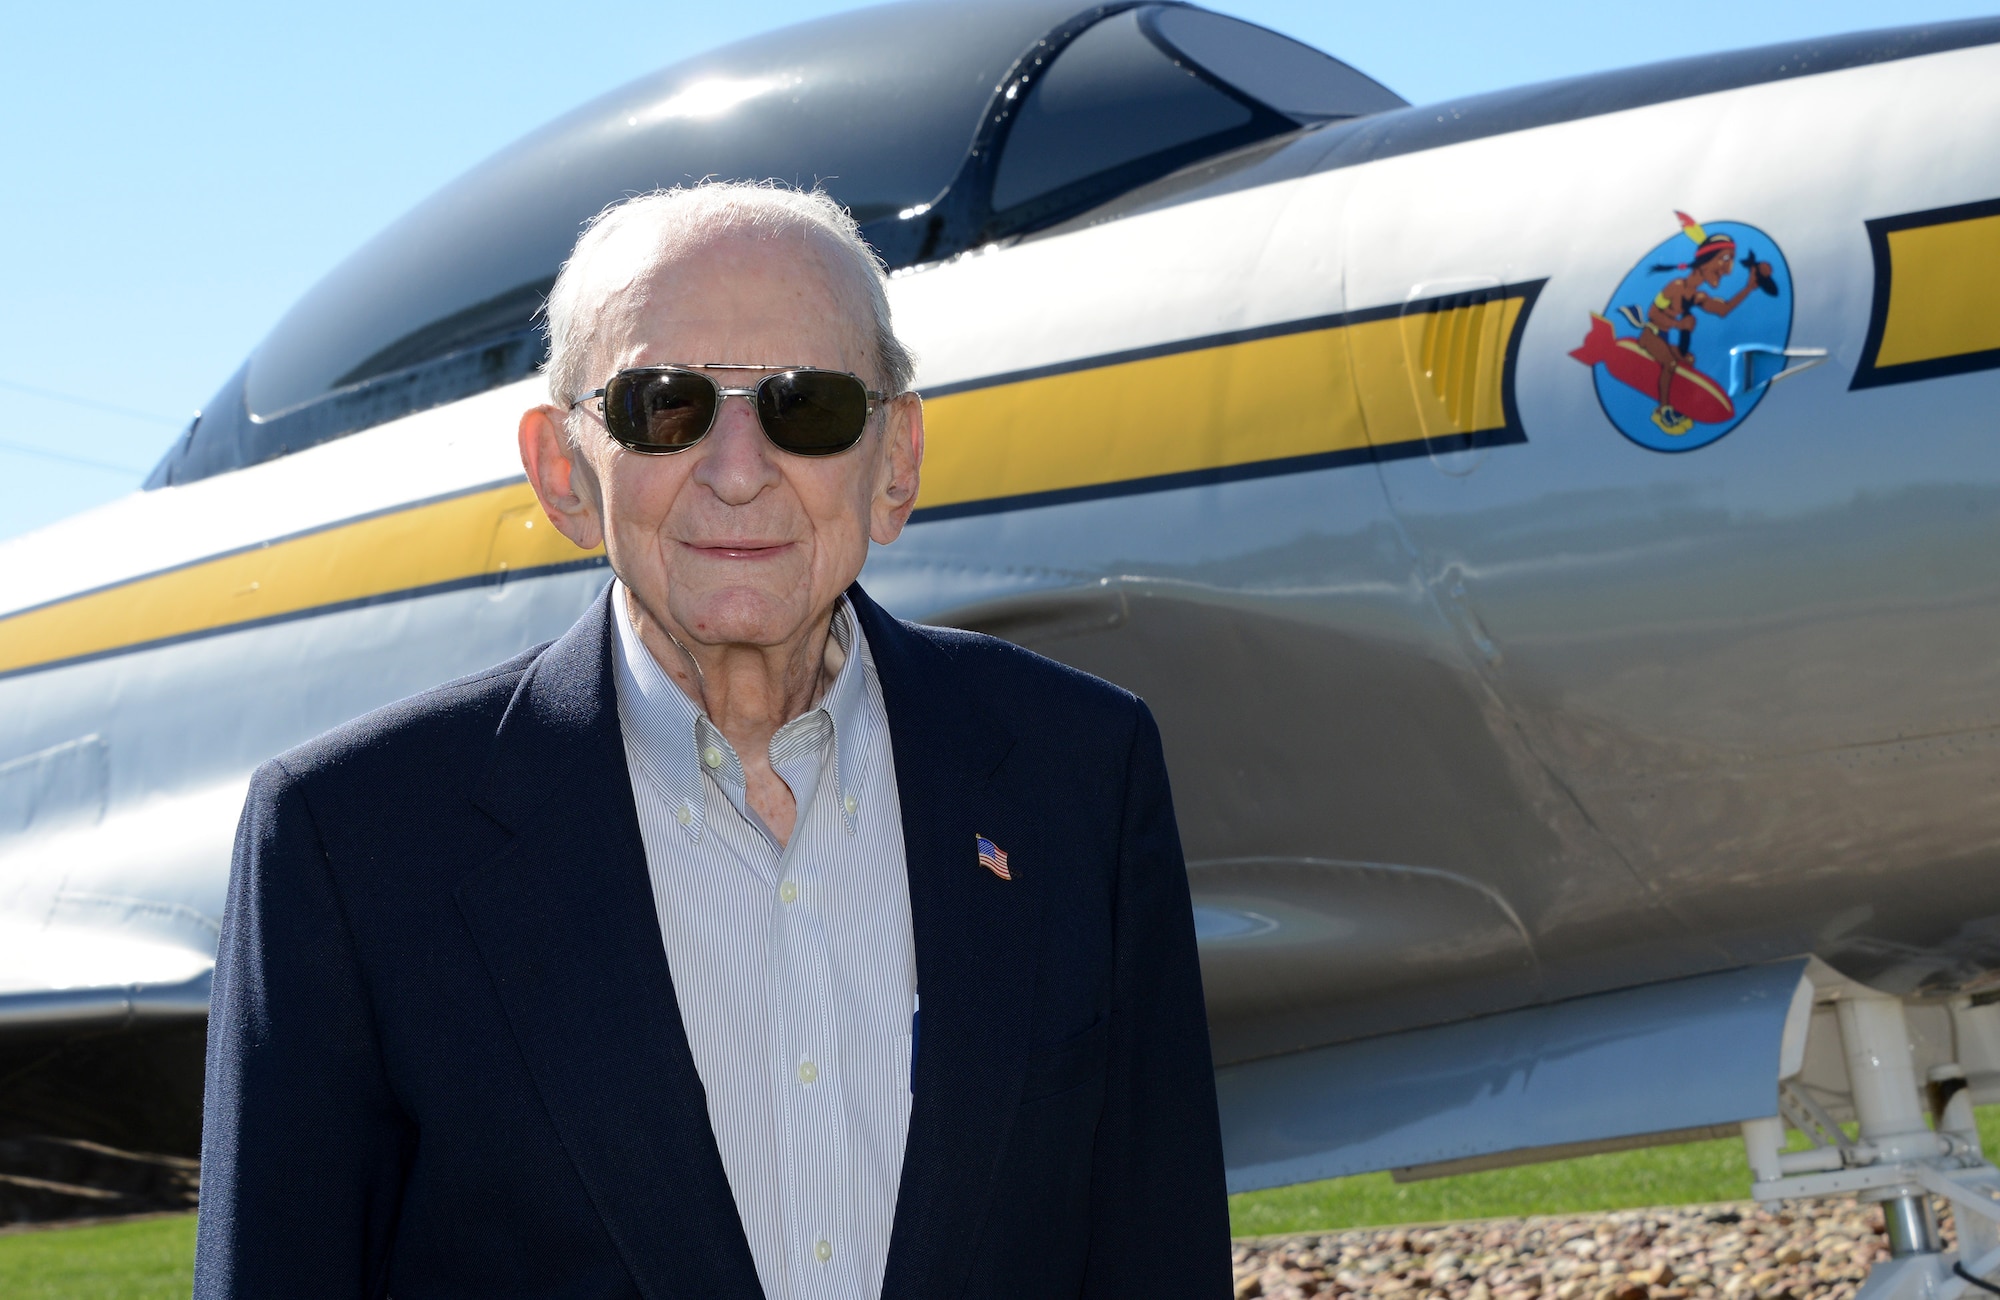 World War II Veteran and former Air National Guard Wing Commander, Col. Warren “Bud” Nelson (Ret.), stands in front of a U.S. Air Force F-80 Shooting Star, he once piloted as a member of the Iowa Air National Guard. Nelson is visiting his old unit, the 185th Air Refueling Wing, during a 70th anniversary open house event in Sioux City, Iowa on September 10, 2016.
U.S. Air National Guard photo by: Master Sgt. Vincent De Groot
